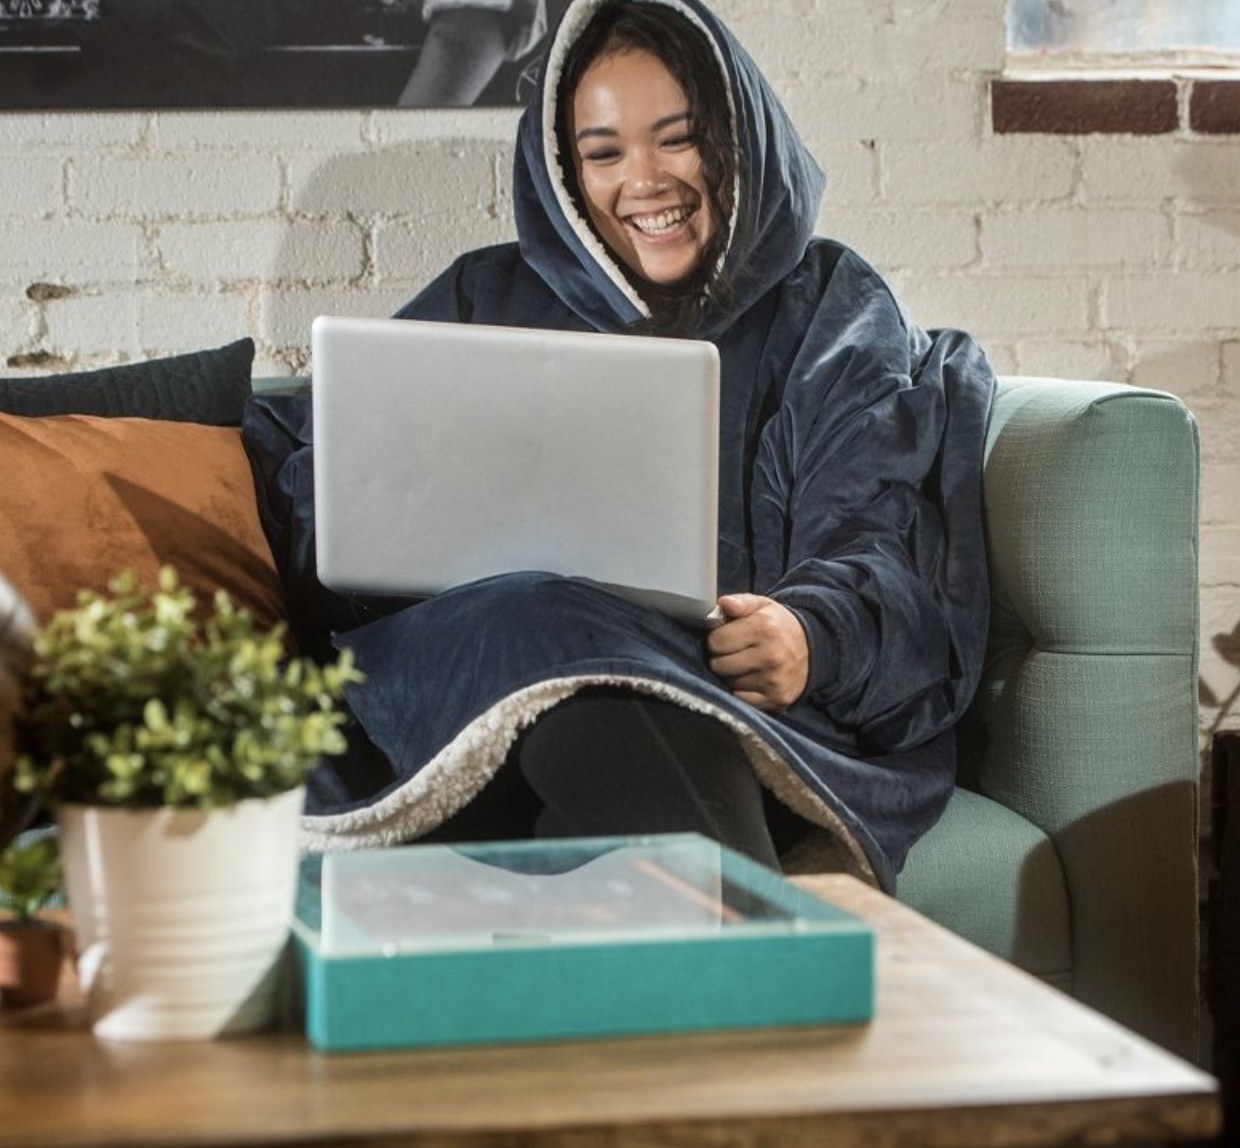 Model wearing the blue blanket while working on laptop